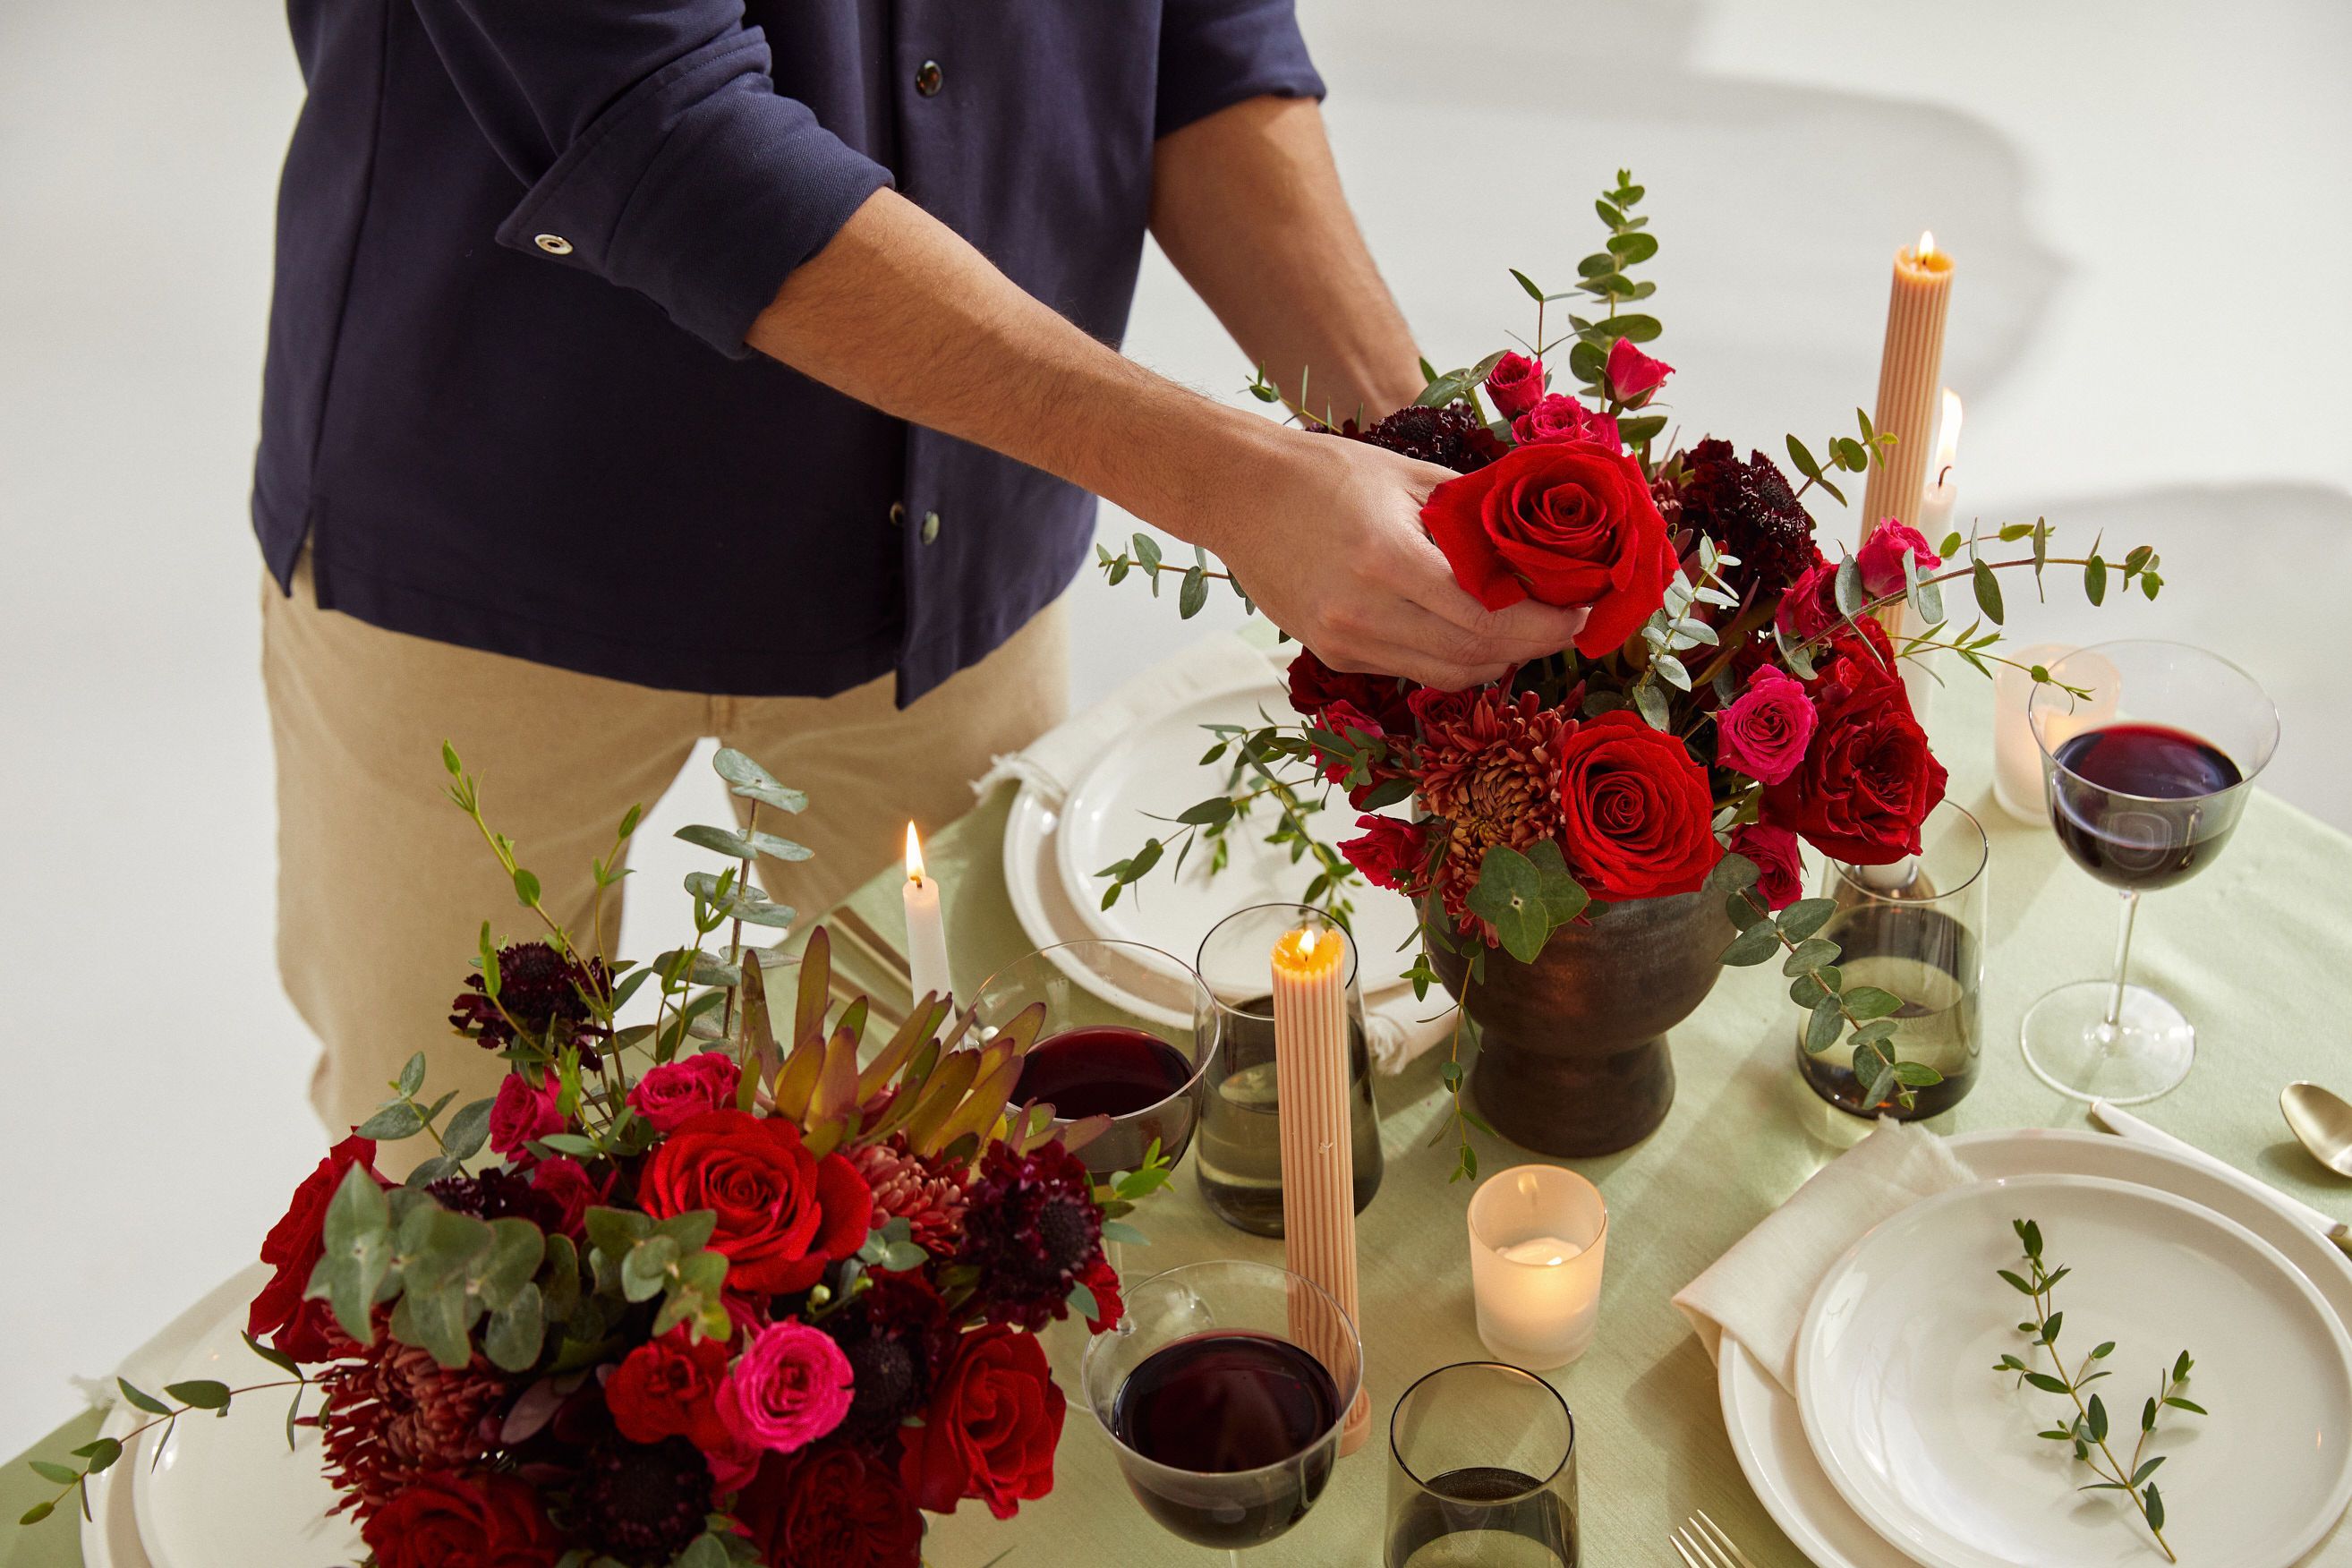 Close up of a man arranging red roses on the dining room table for Valentine's Day.